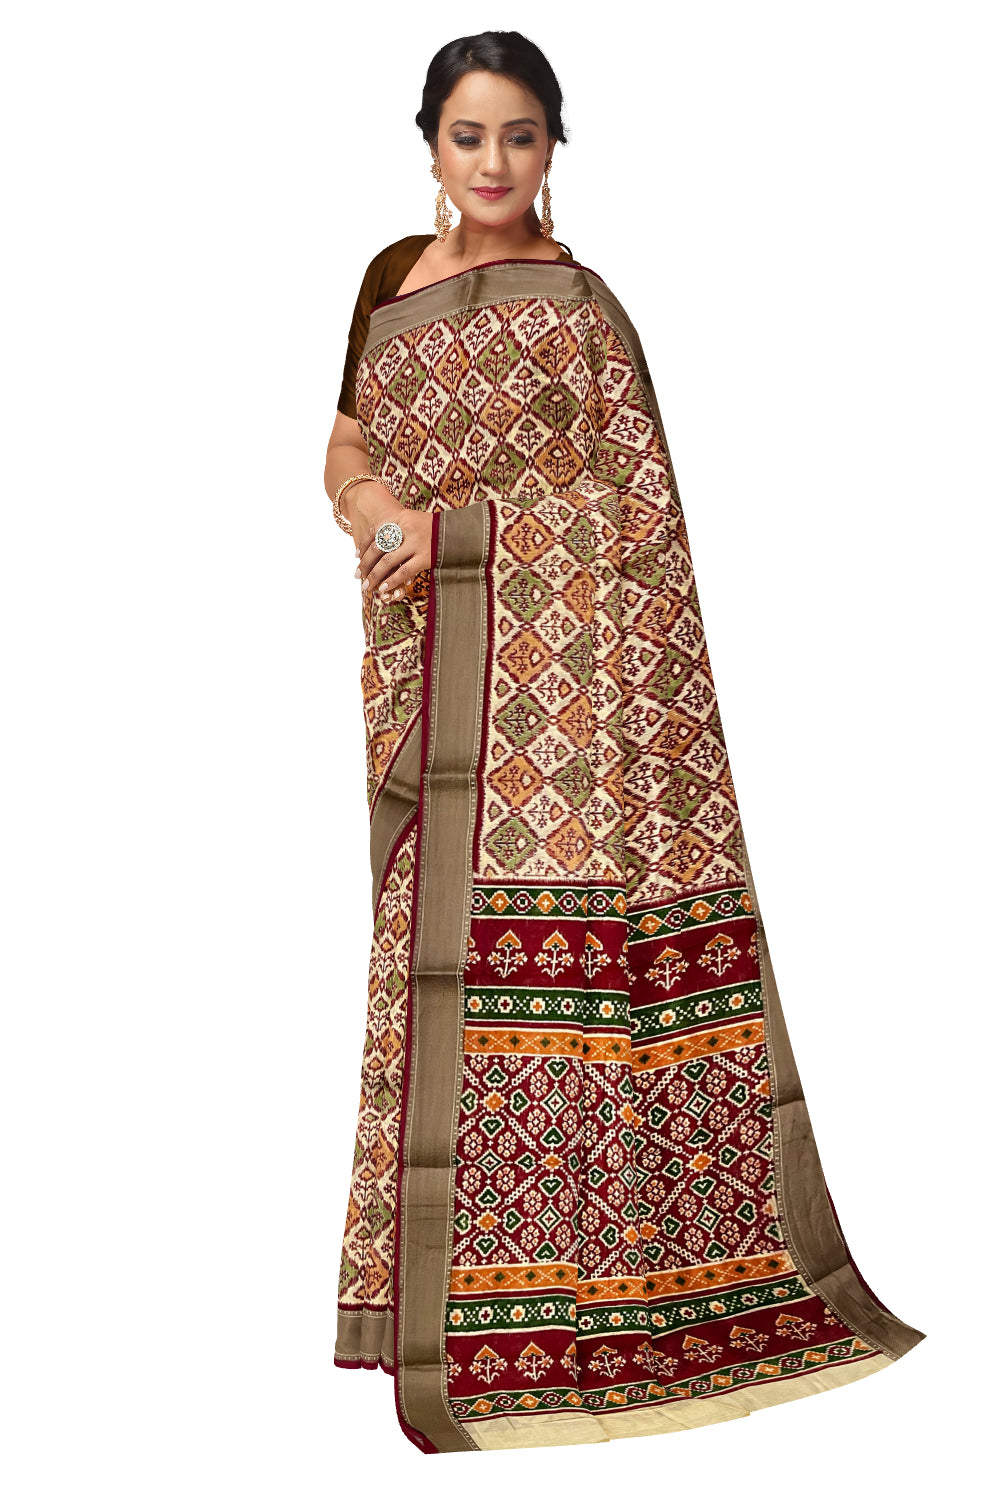 Southloom Maroon Beige Cotton Saree with Woven Patterns on Body